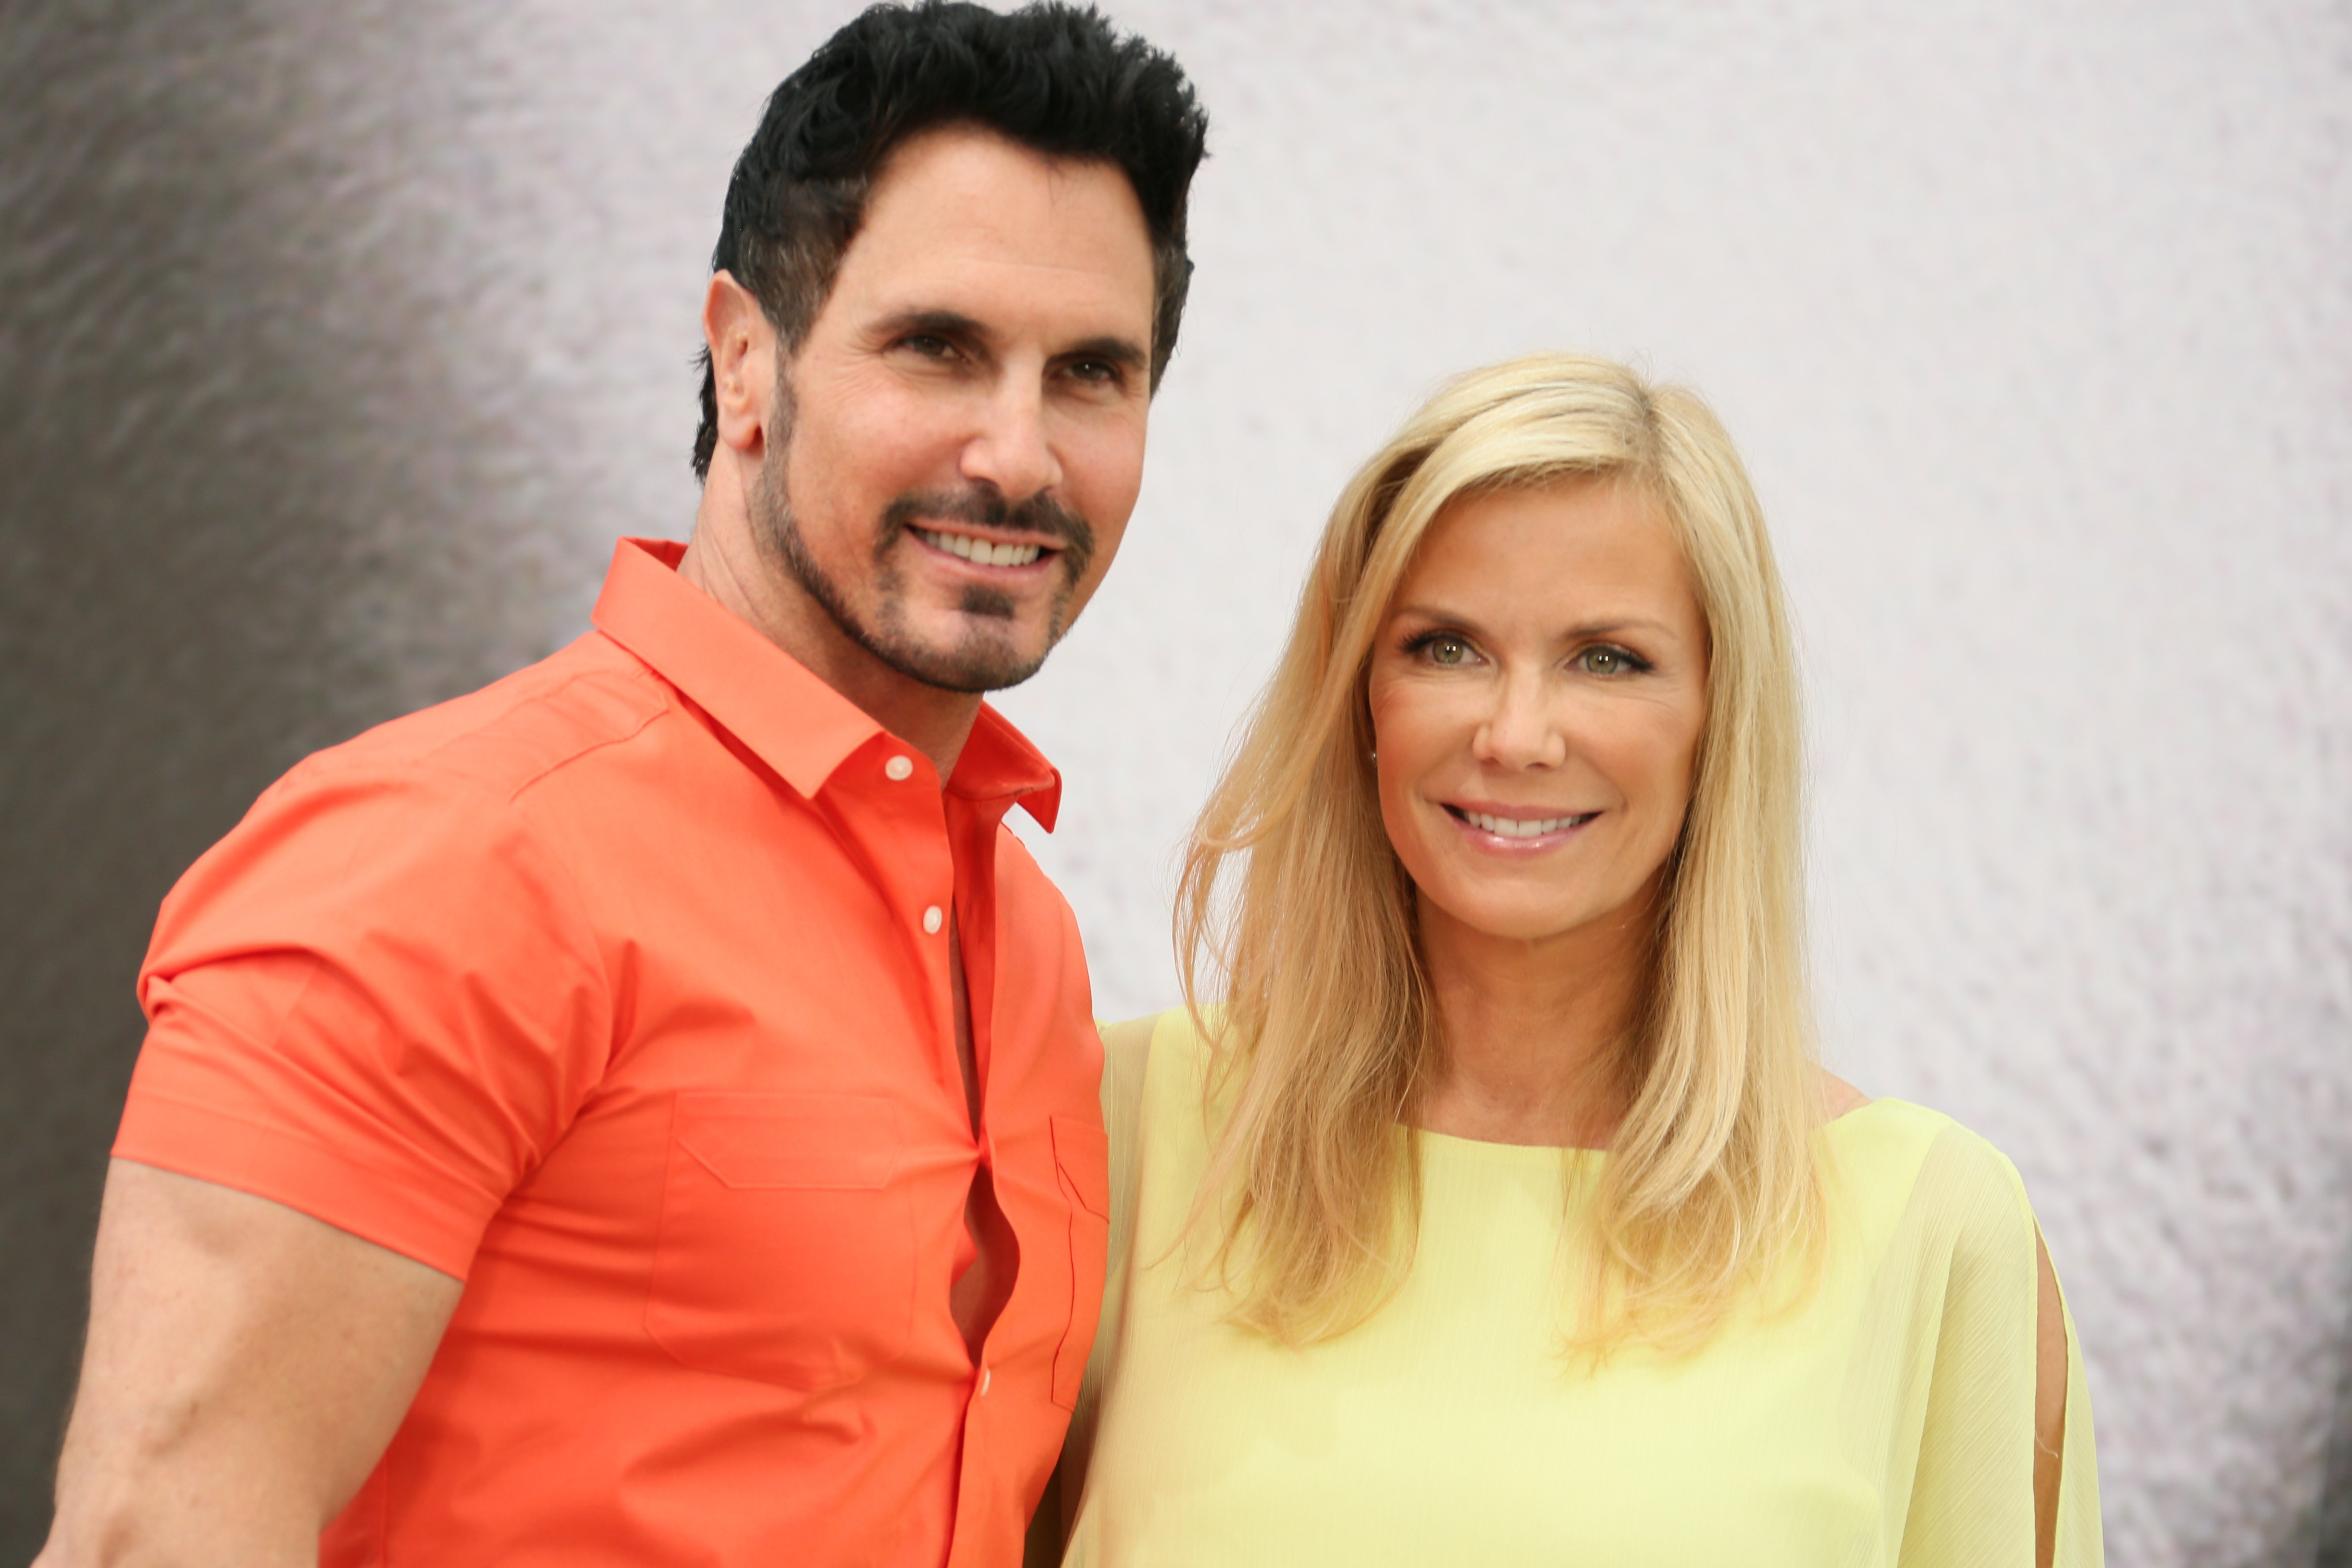 'The Bold and the Beautiful' actor Don Diamont in an orange shirt and Katherine Kelly Lang in a yellow blouse.